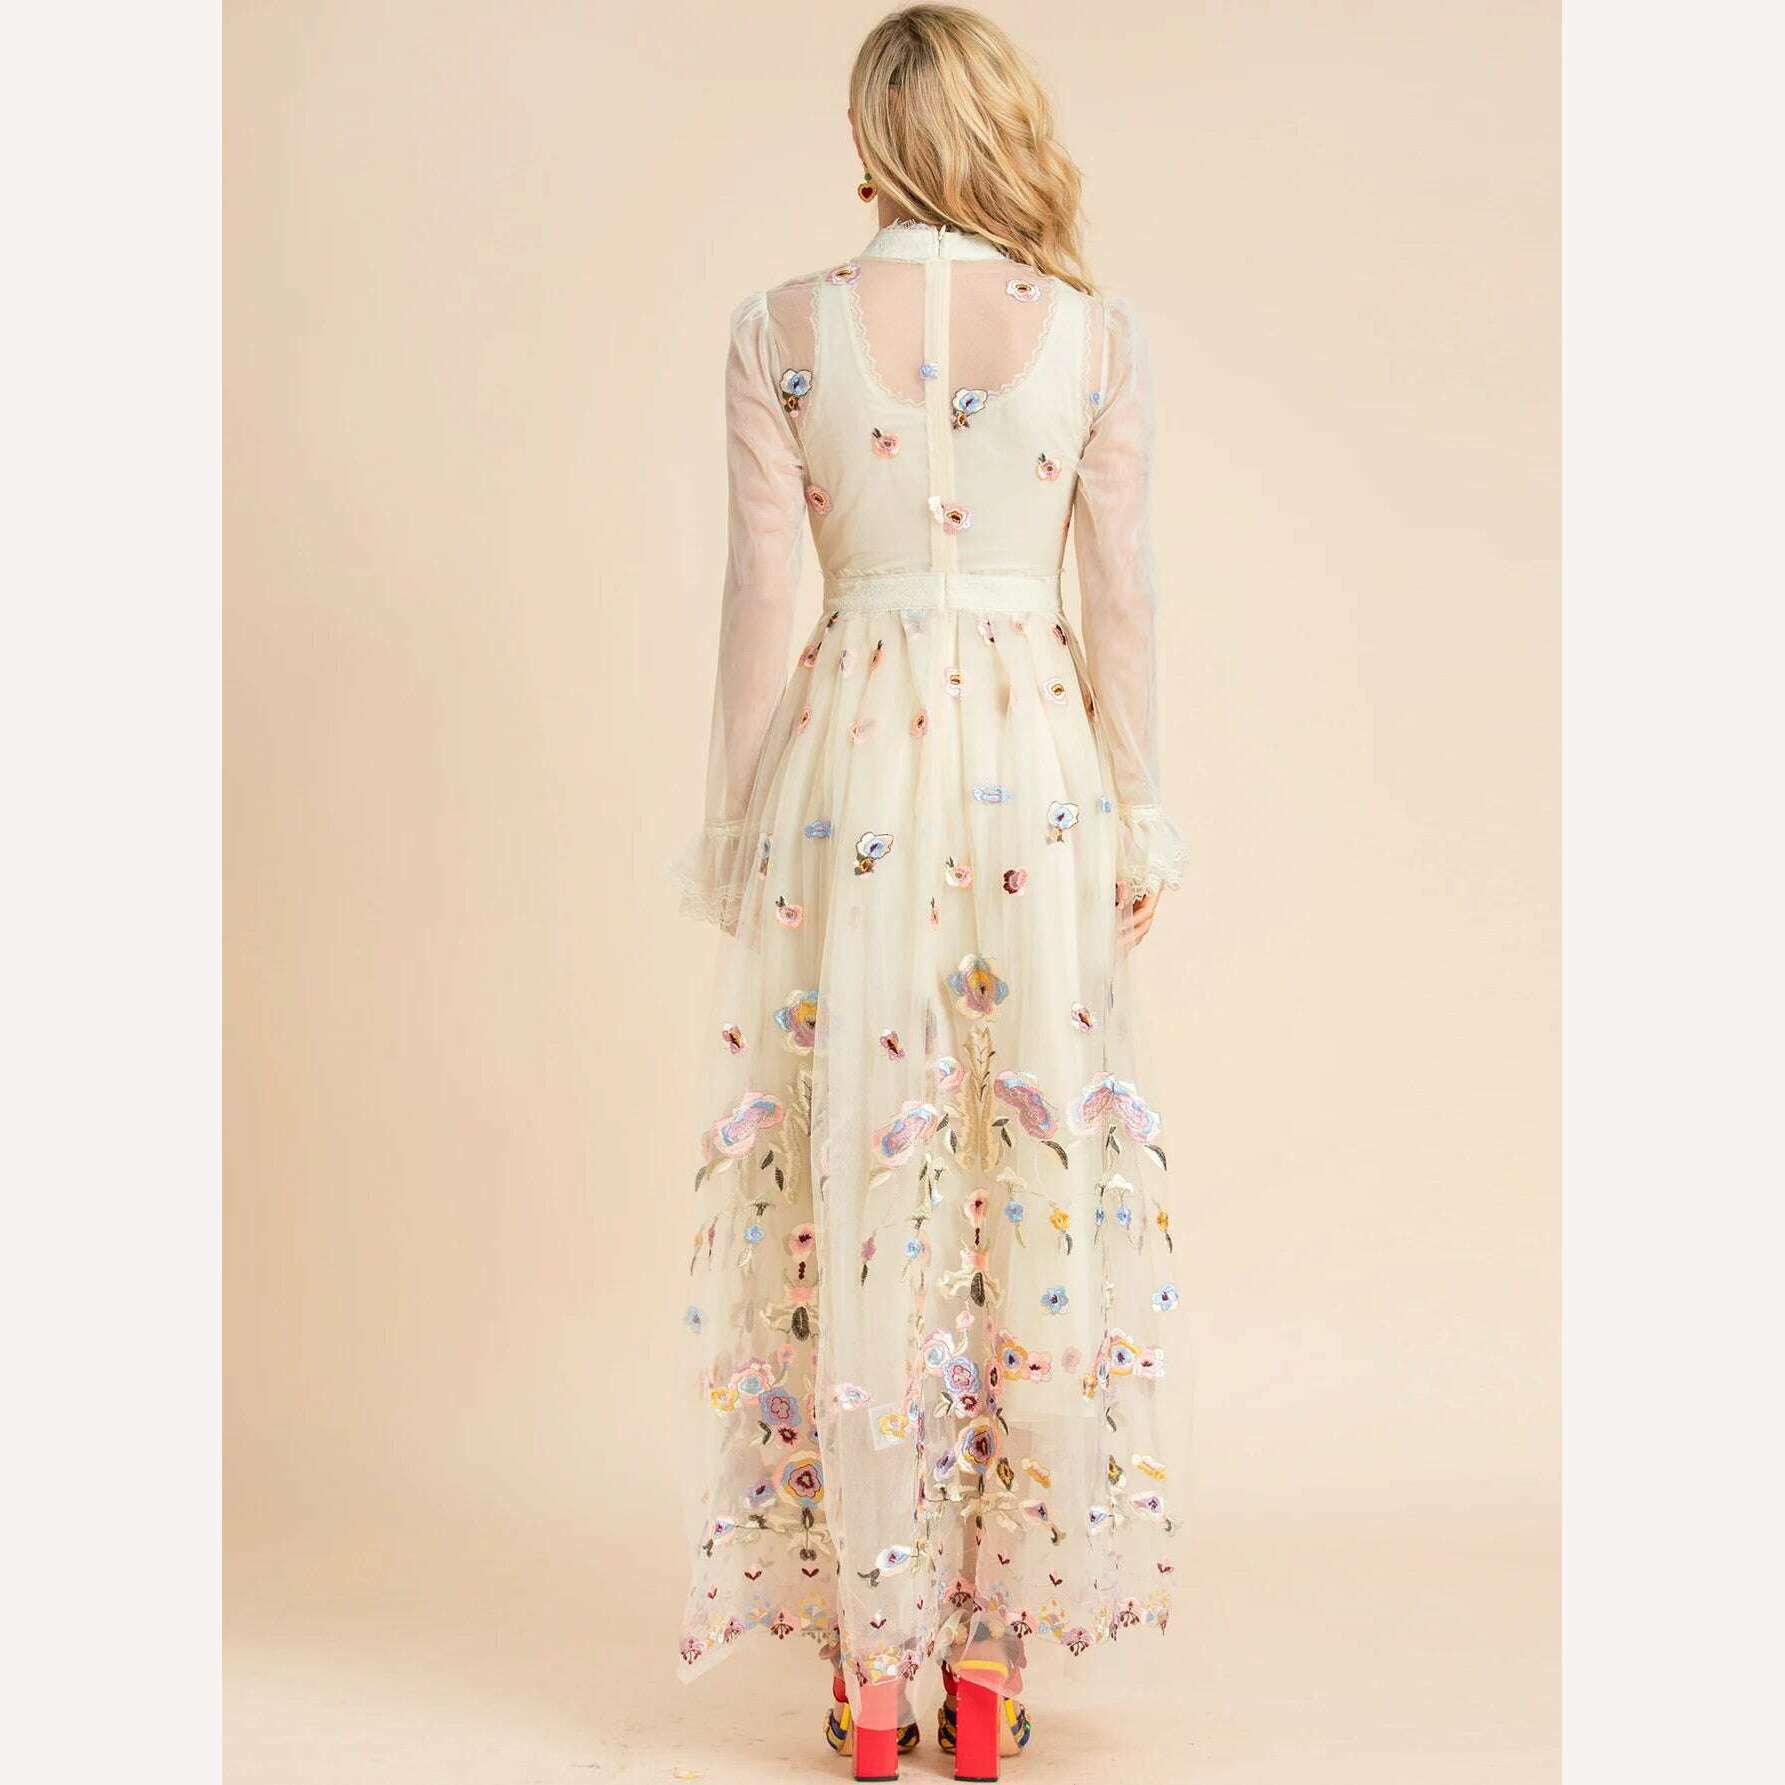 KIMLUD, LD LINDA DELLA 2022 Summer Runway Maxi Vintage Party Dress Women's Stand collar Flare Sleeve Mesh Flowers Embroidery Long Dress, KIMLUD Womens Clothes